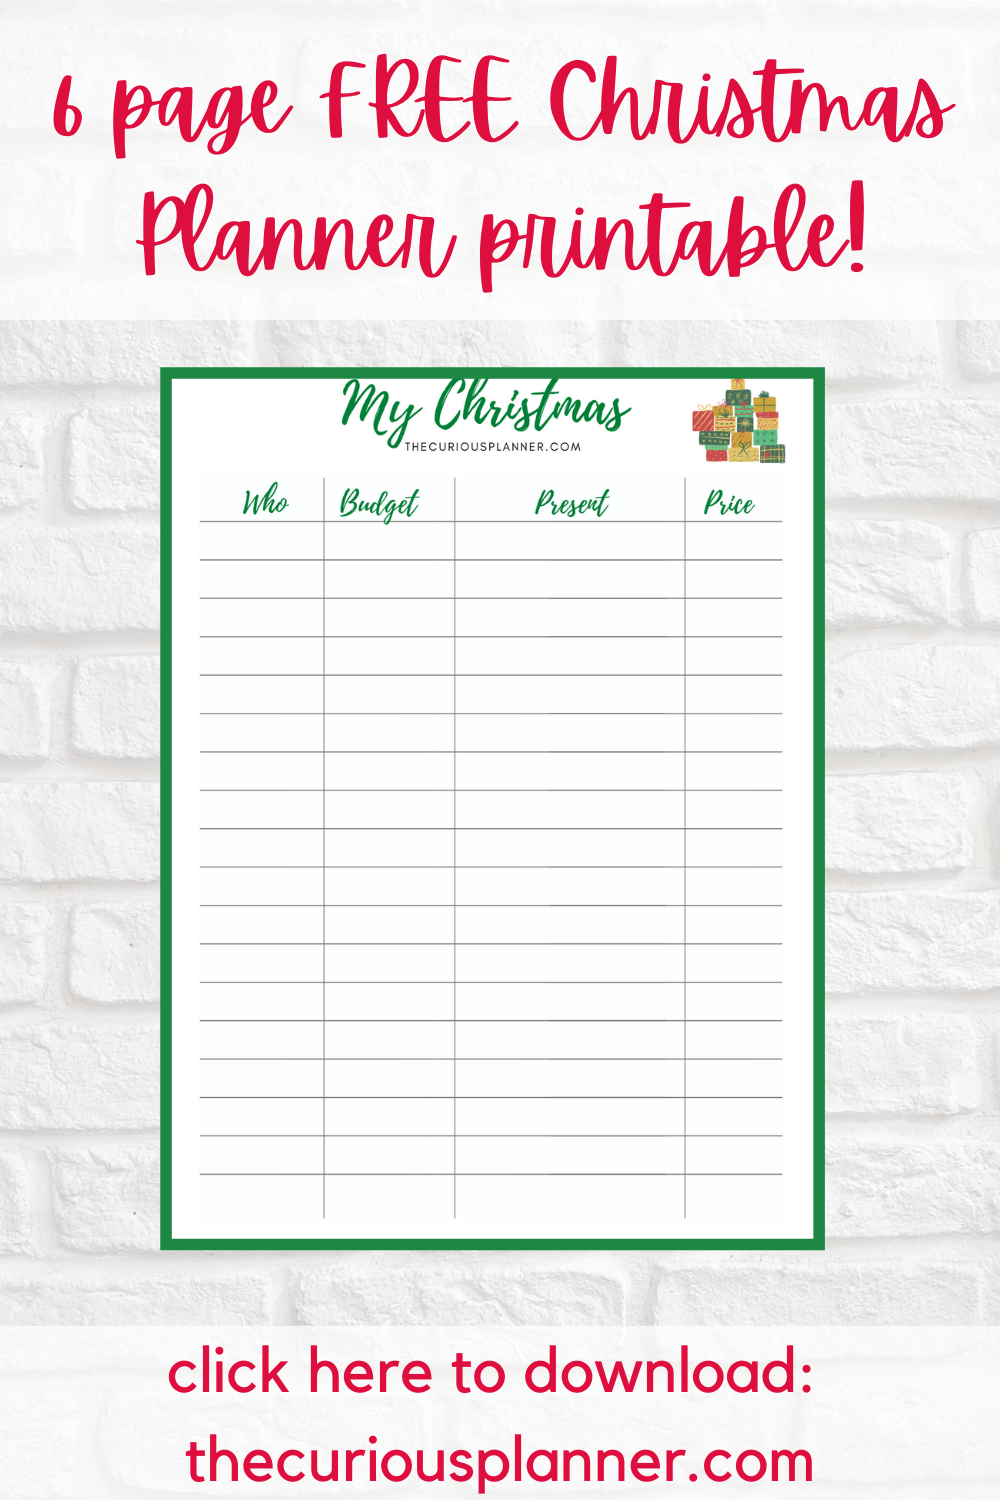 FREE 6 Page Christmas Planner Printable The Curious Planner